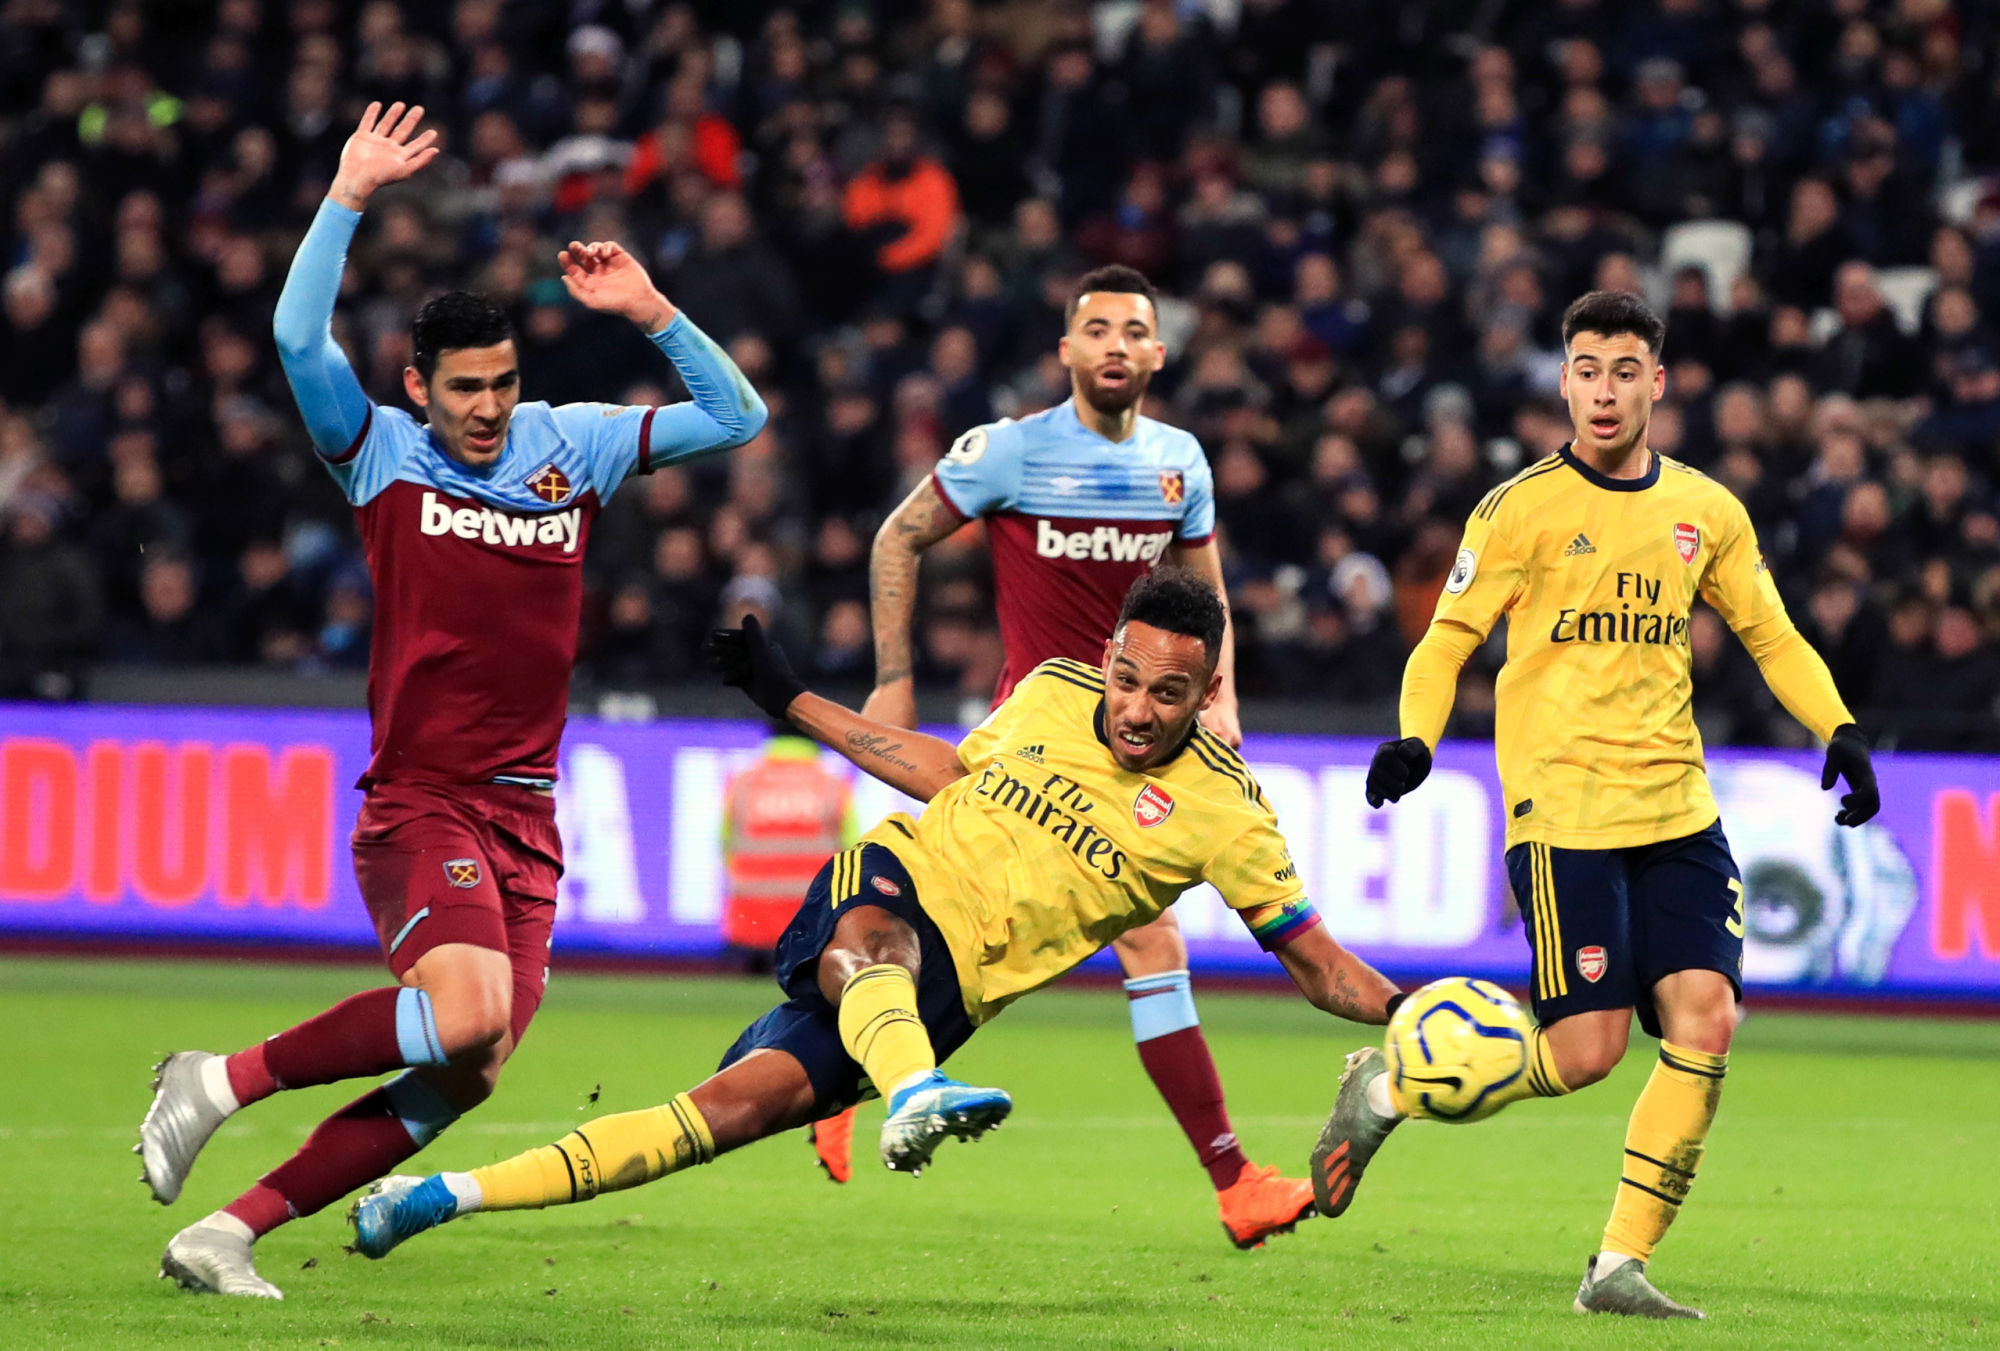 Arsenal's Pierre-Emerick Aubameyang (centre) scores his side's third goal of the game during the Premier League match at the London Stadium, London. - London Stadium - Londres (Angleterre)